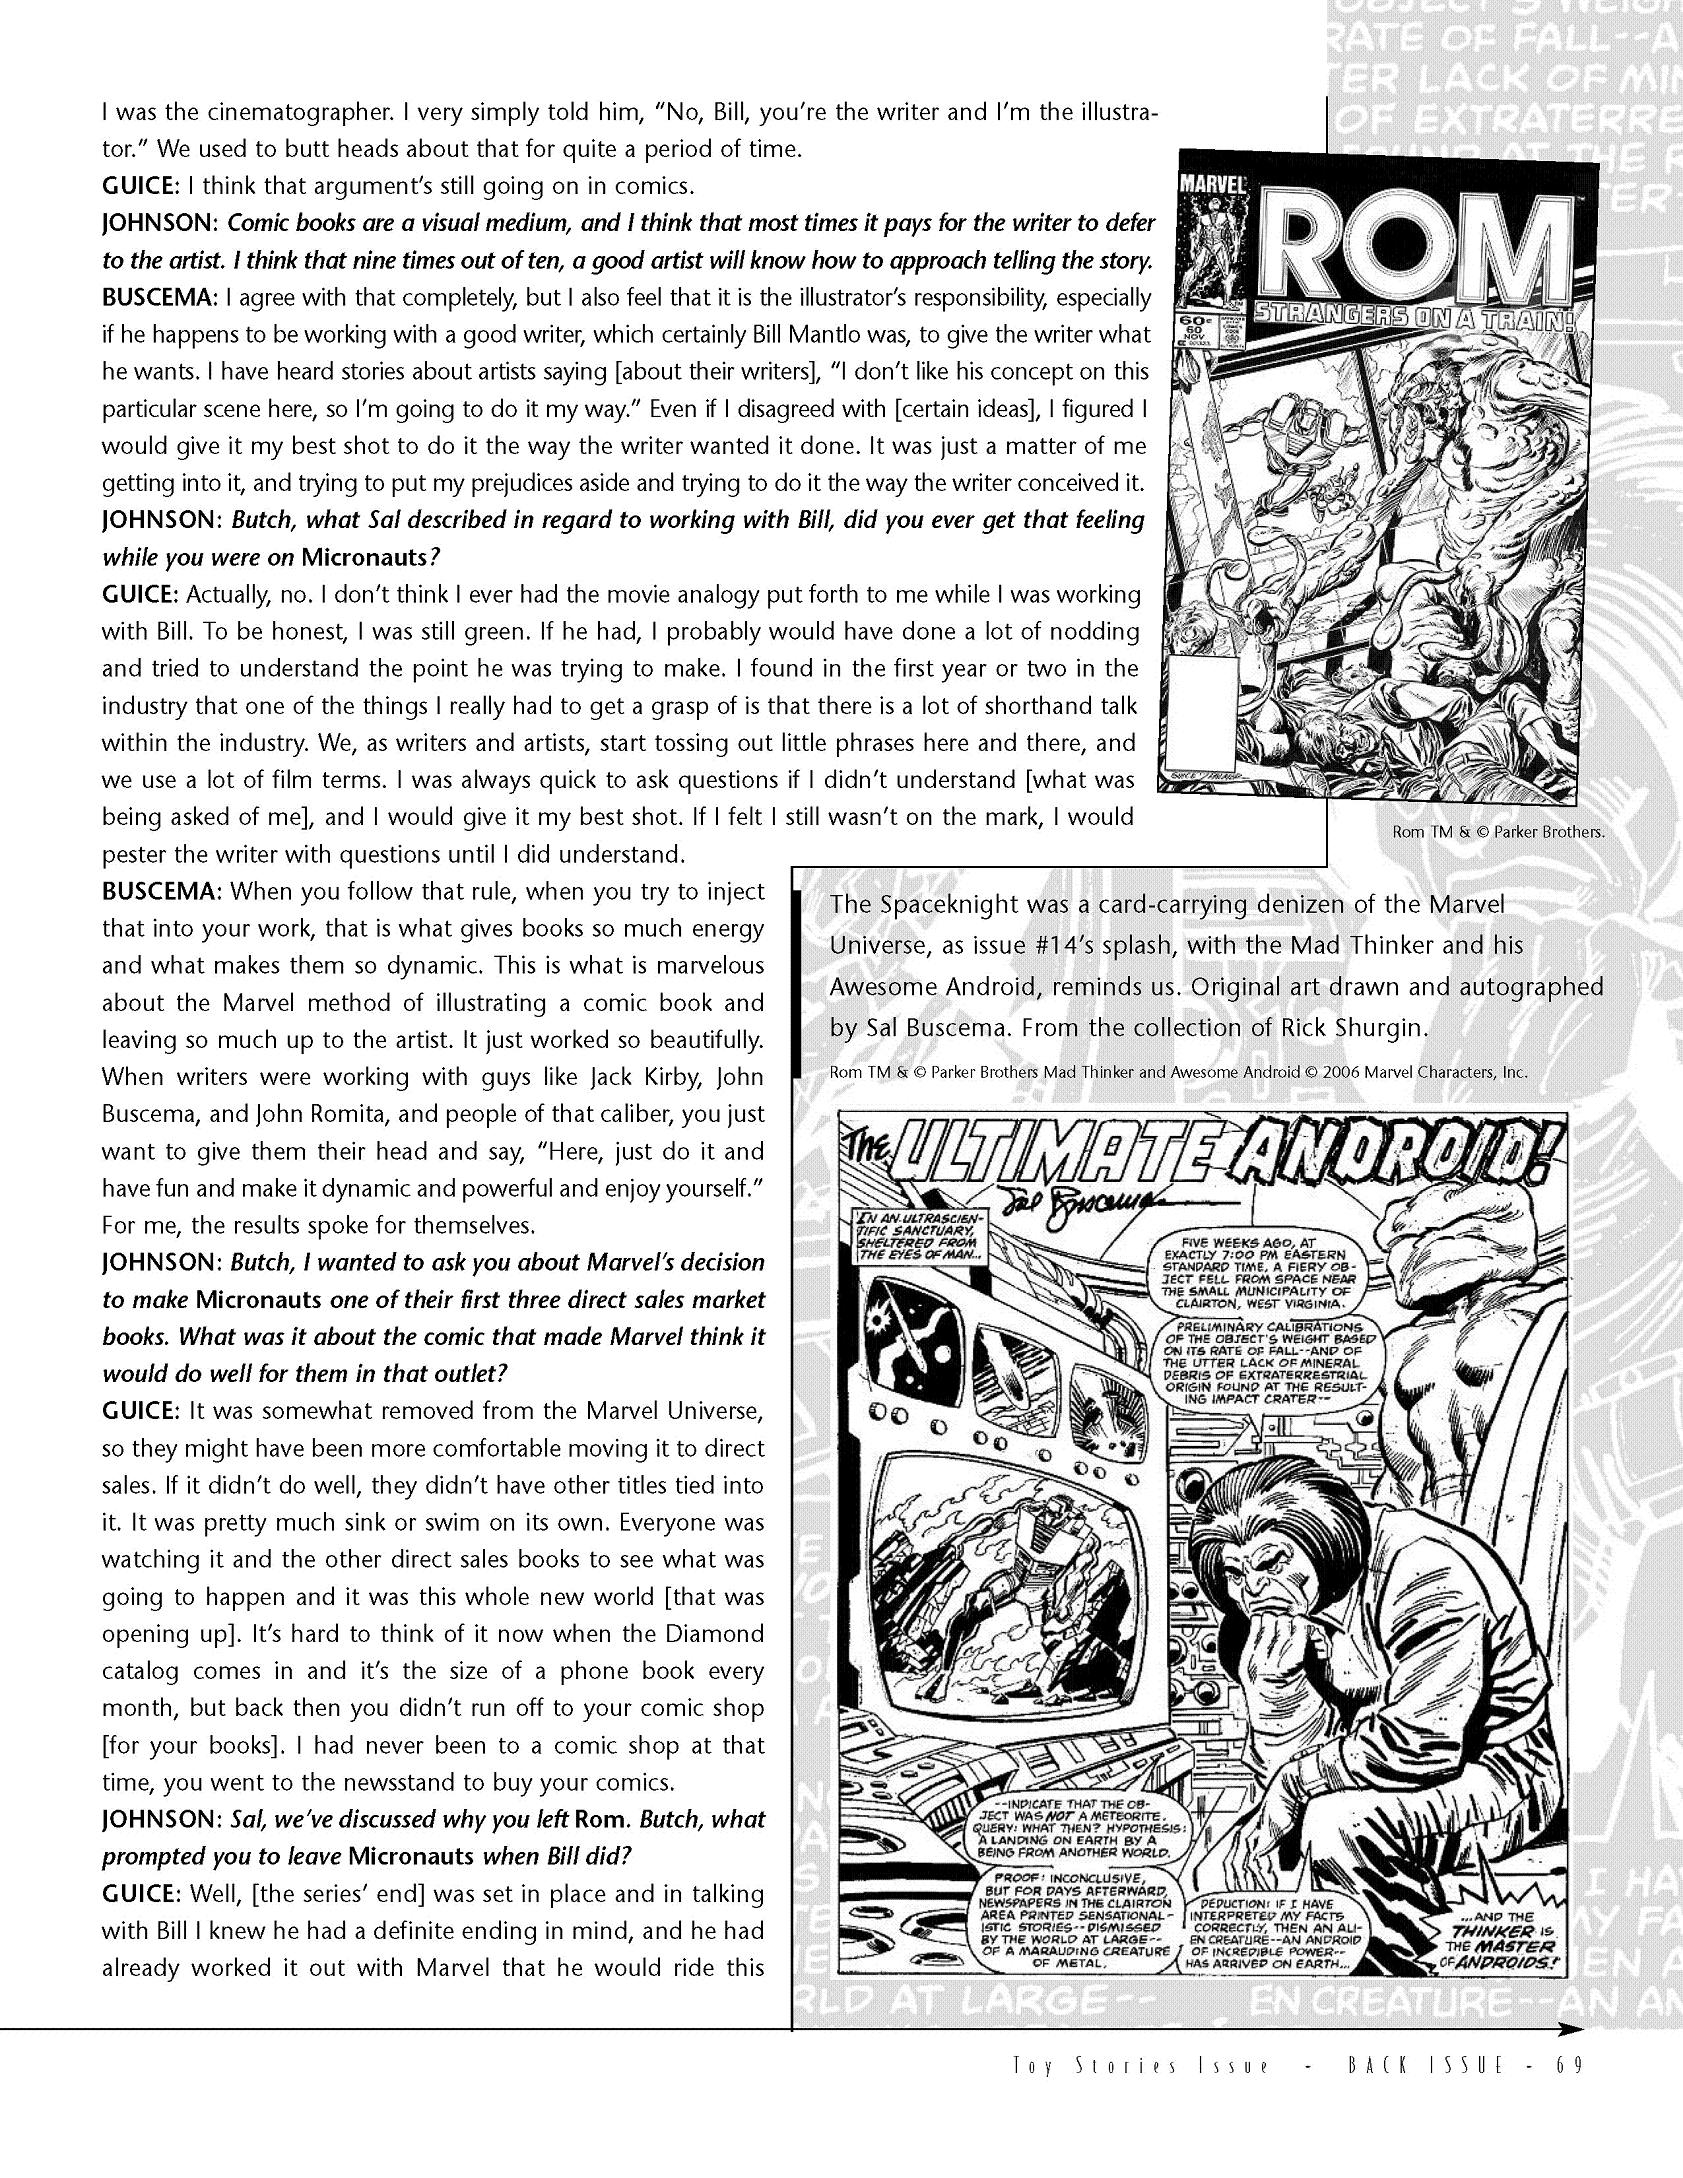 Read online Back Issue comic -  Issue #16 - 69